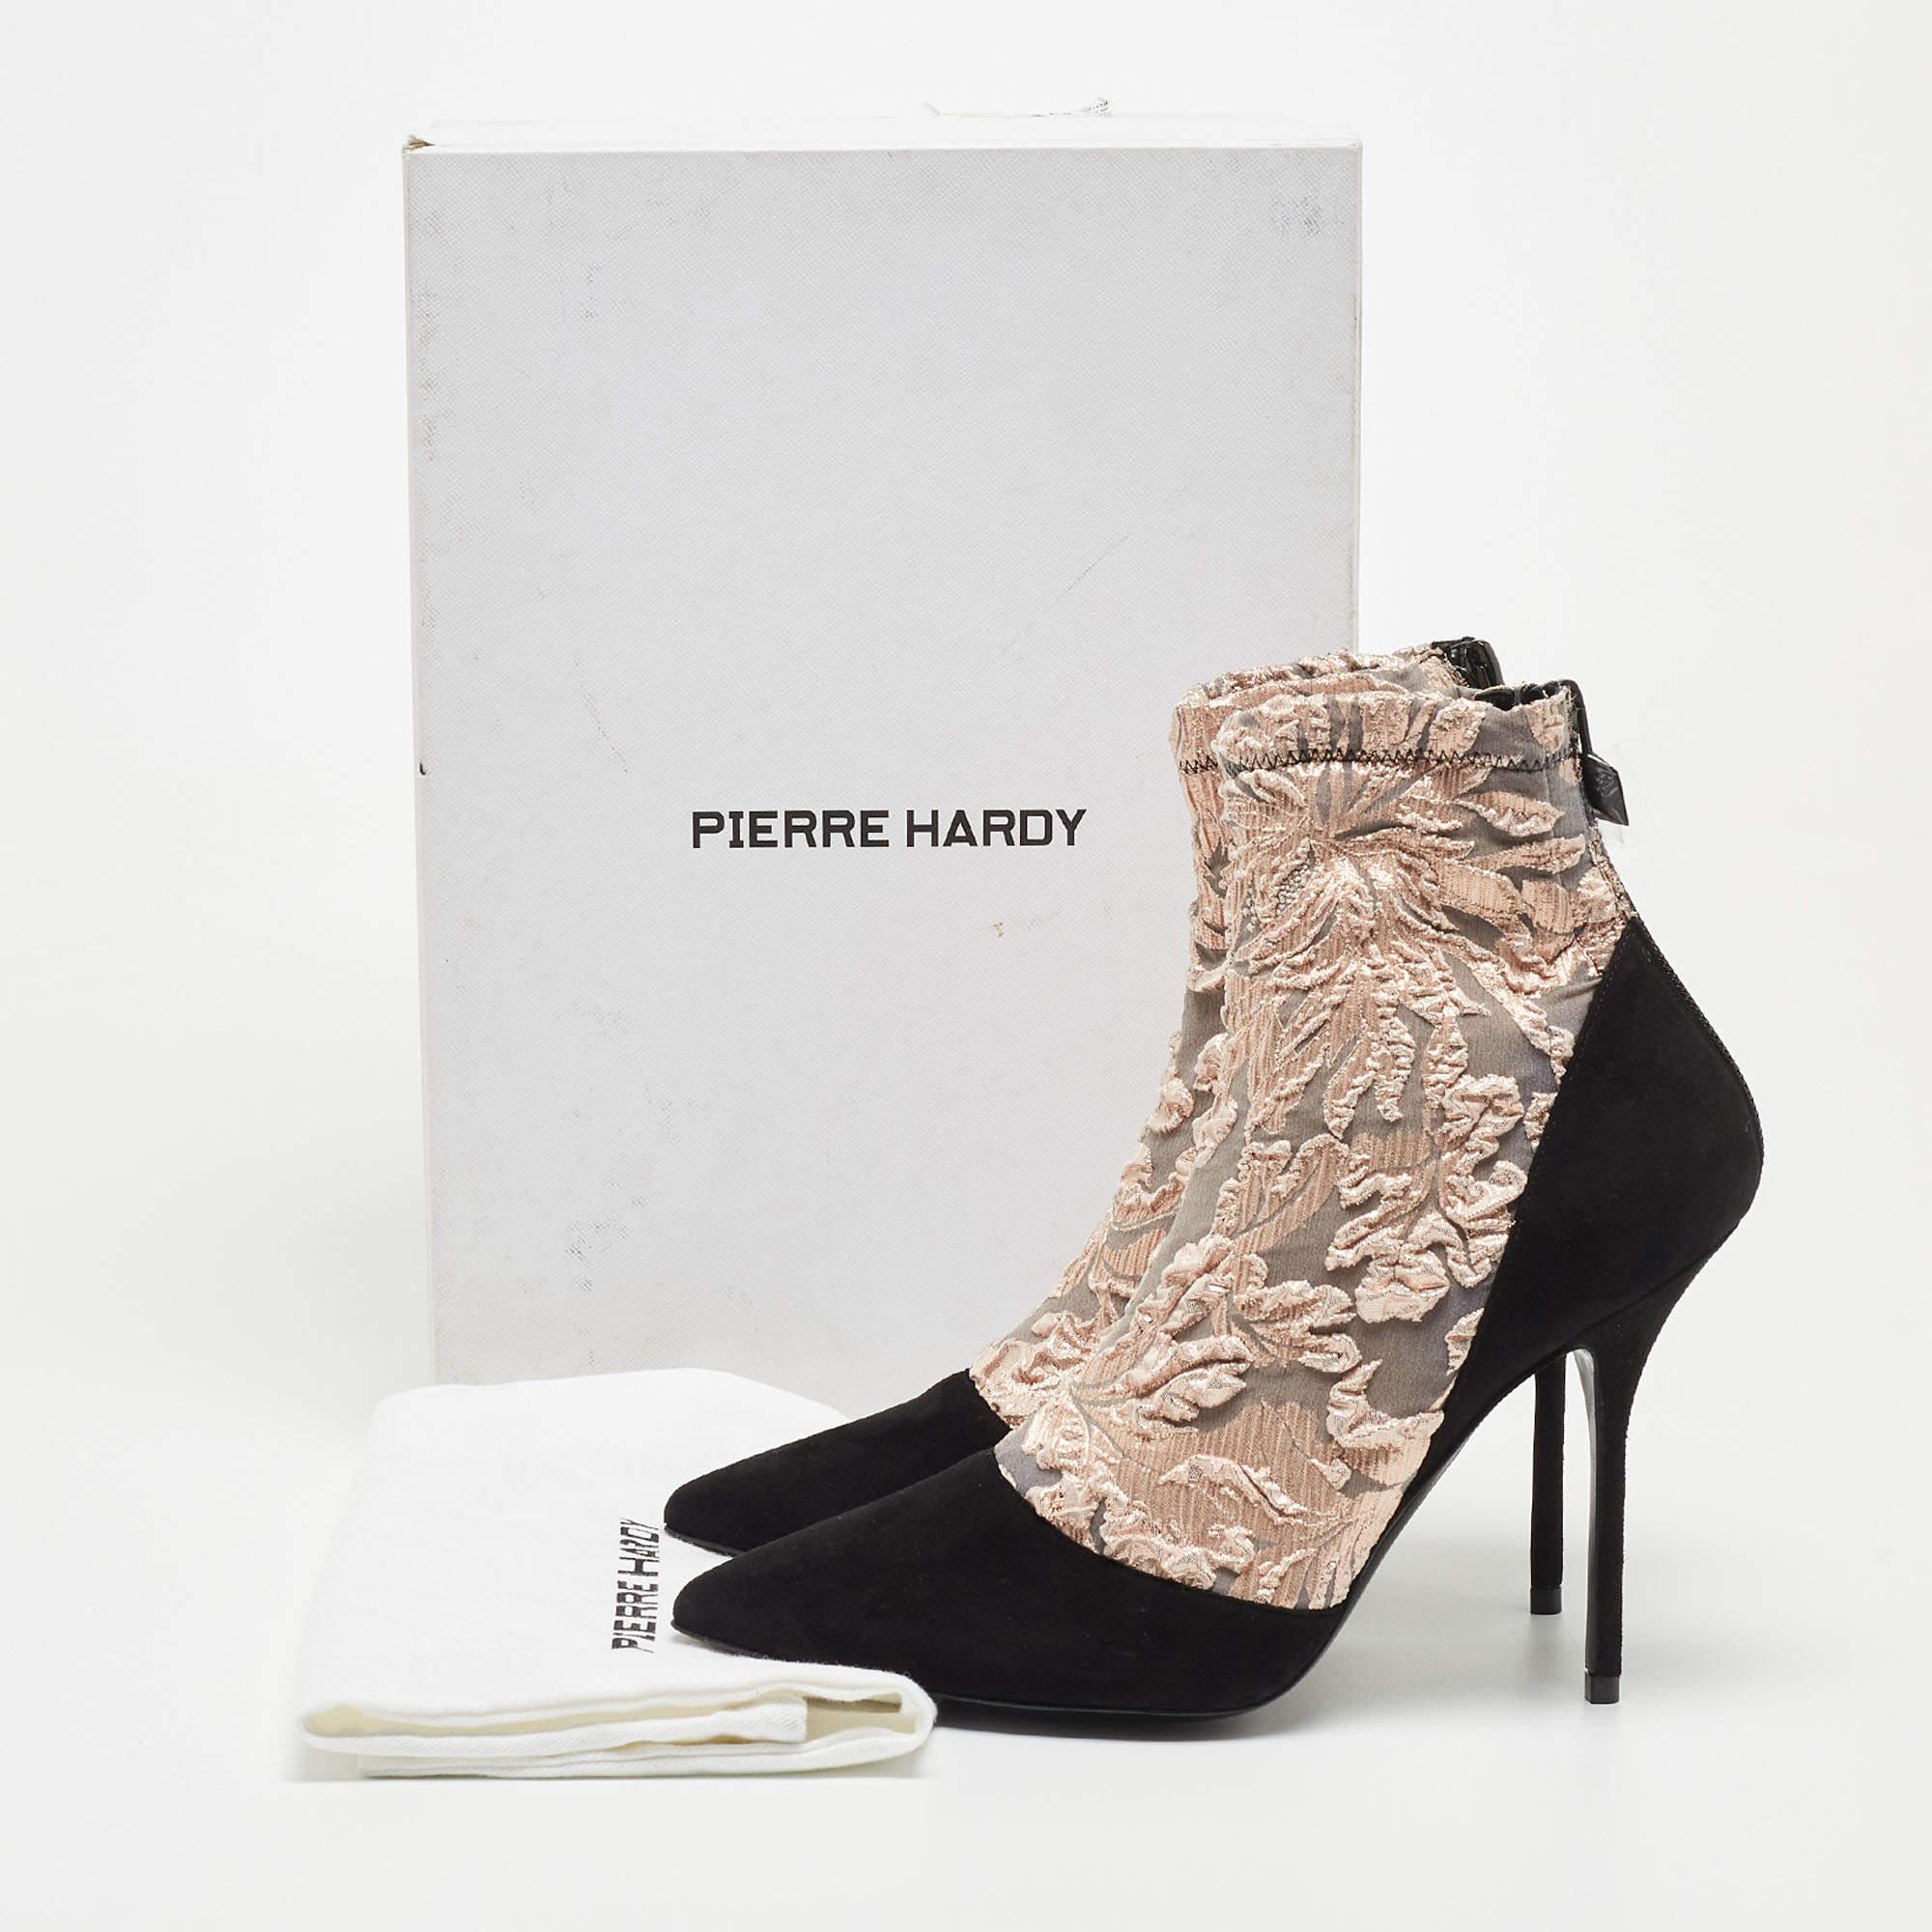 Pierre Hardy Black/Metallic Peach Fabric and Suede Dolly Pointed Toe Ankle Booti For Sale 2